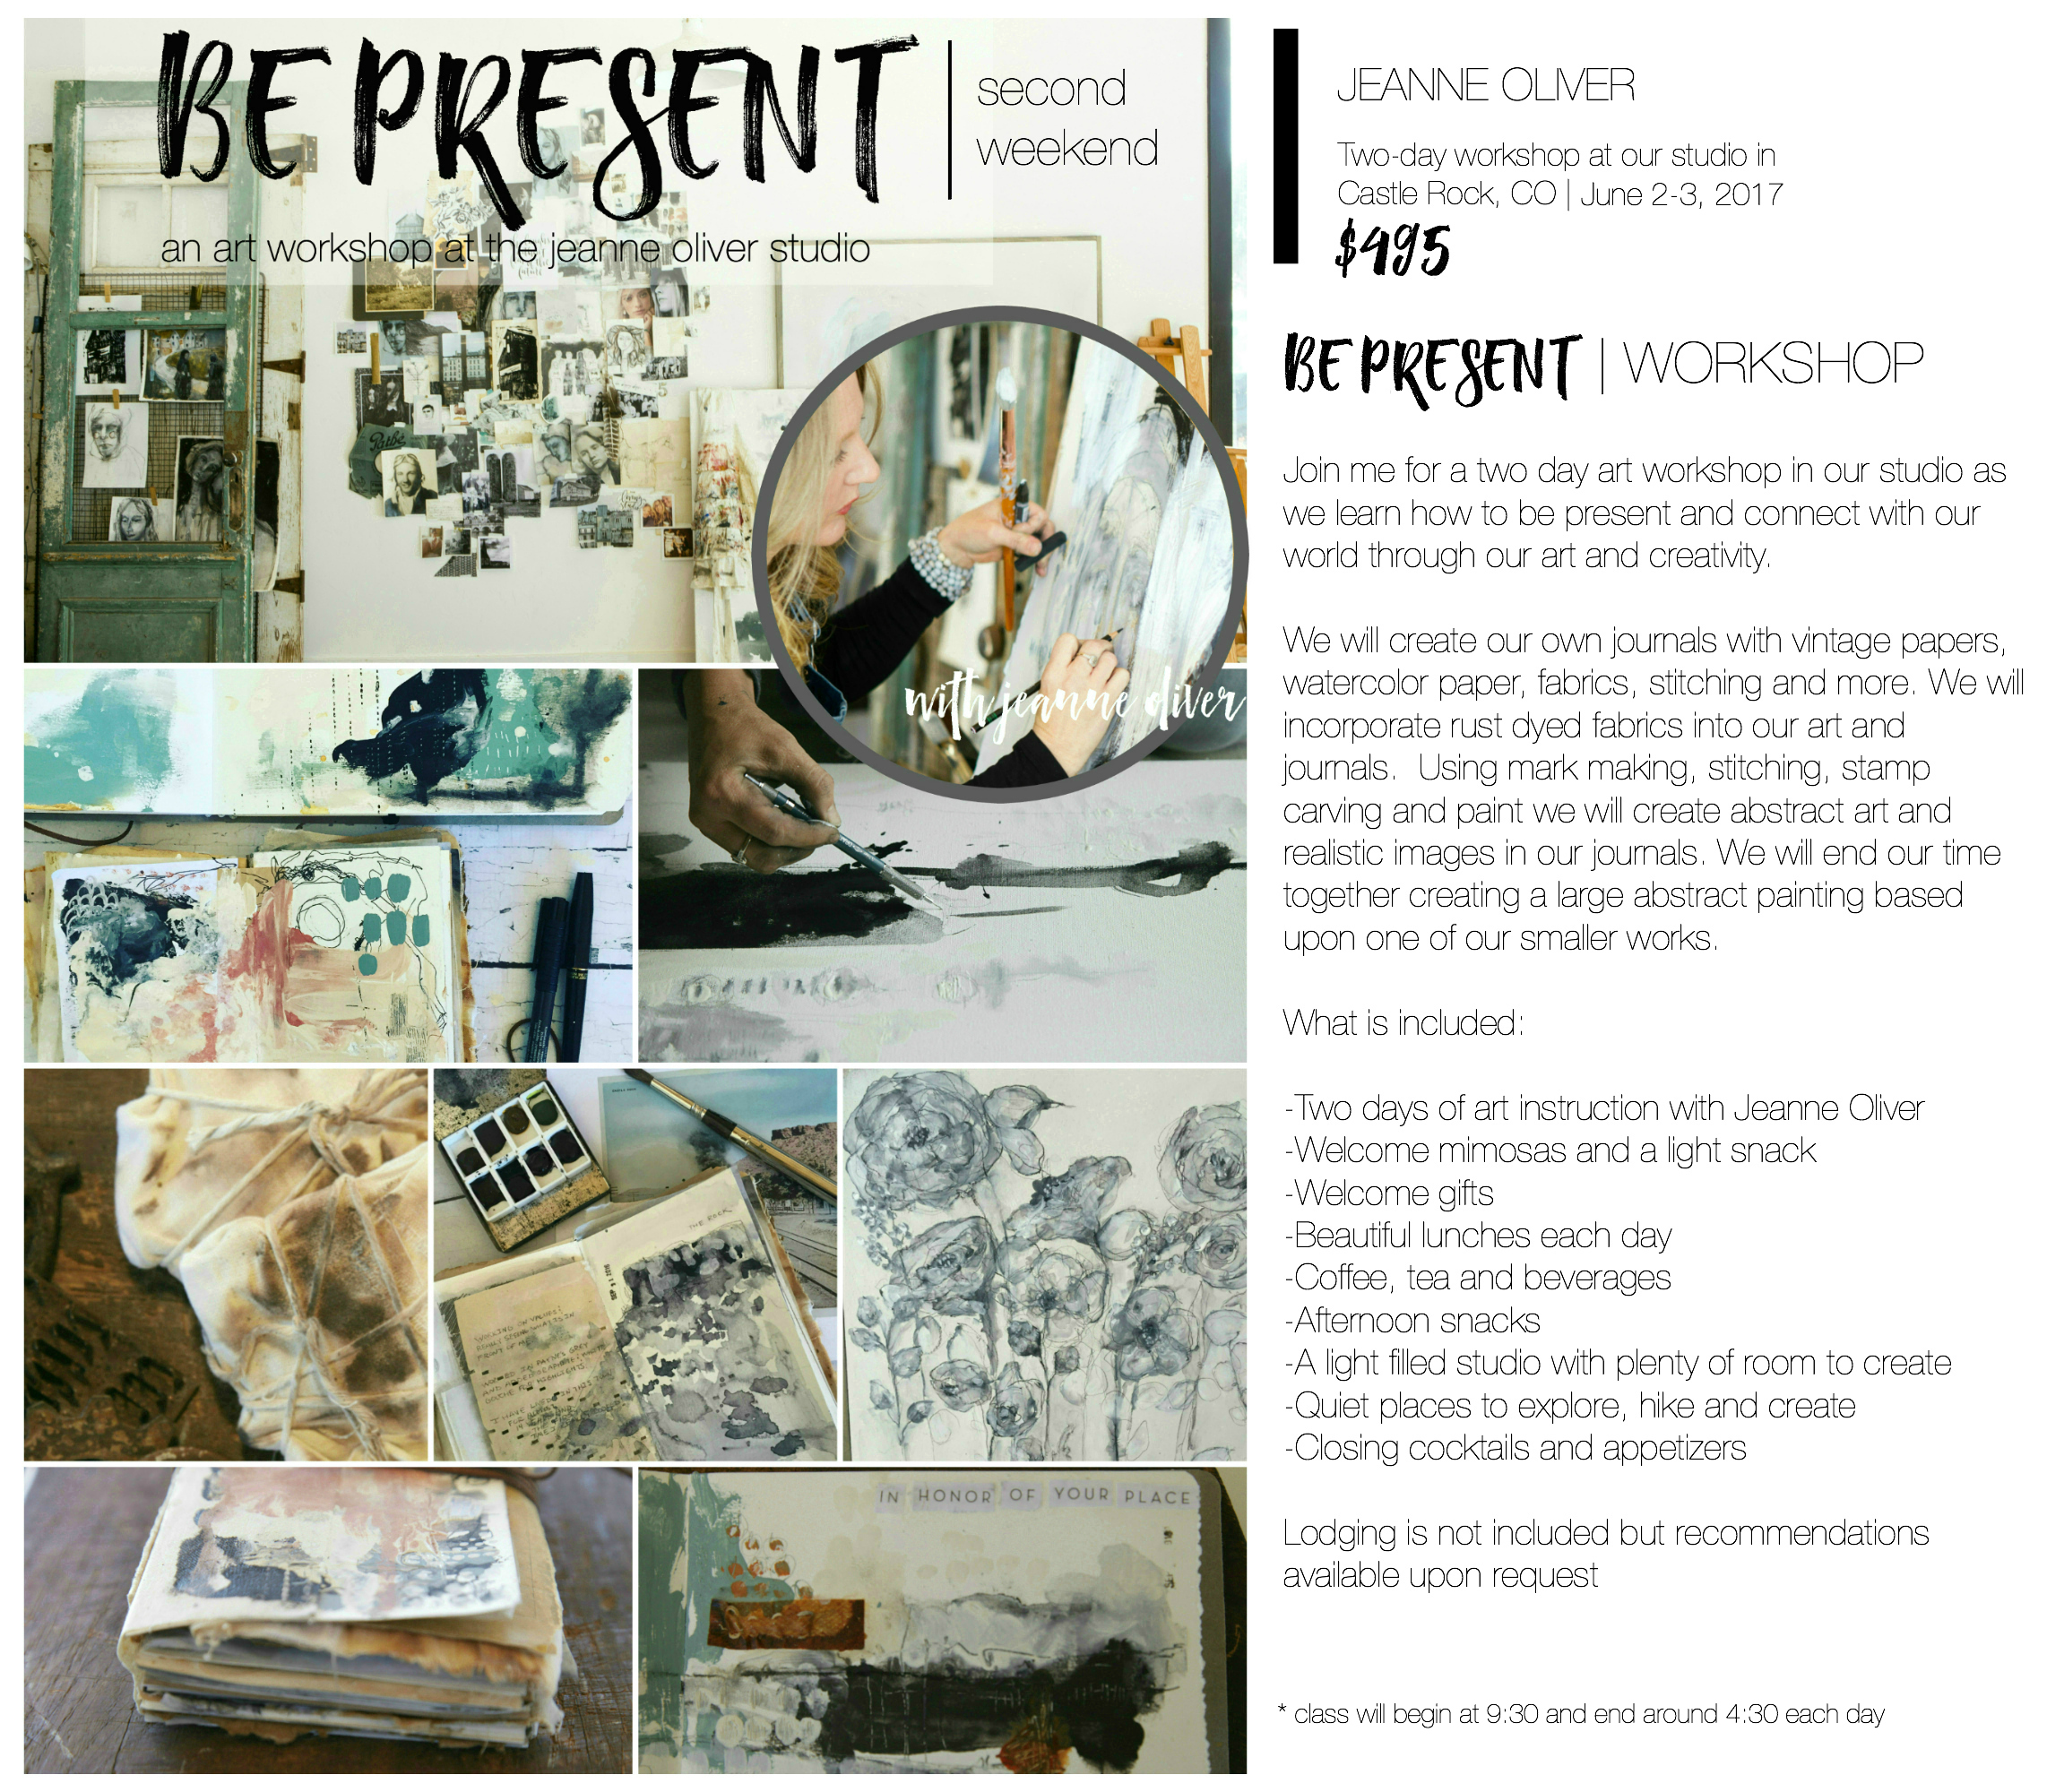 Our First Workshop In Our Studios For 2017 | Be Present Workshop With Jeanne Oliver